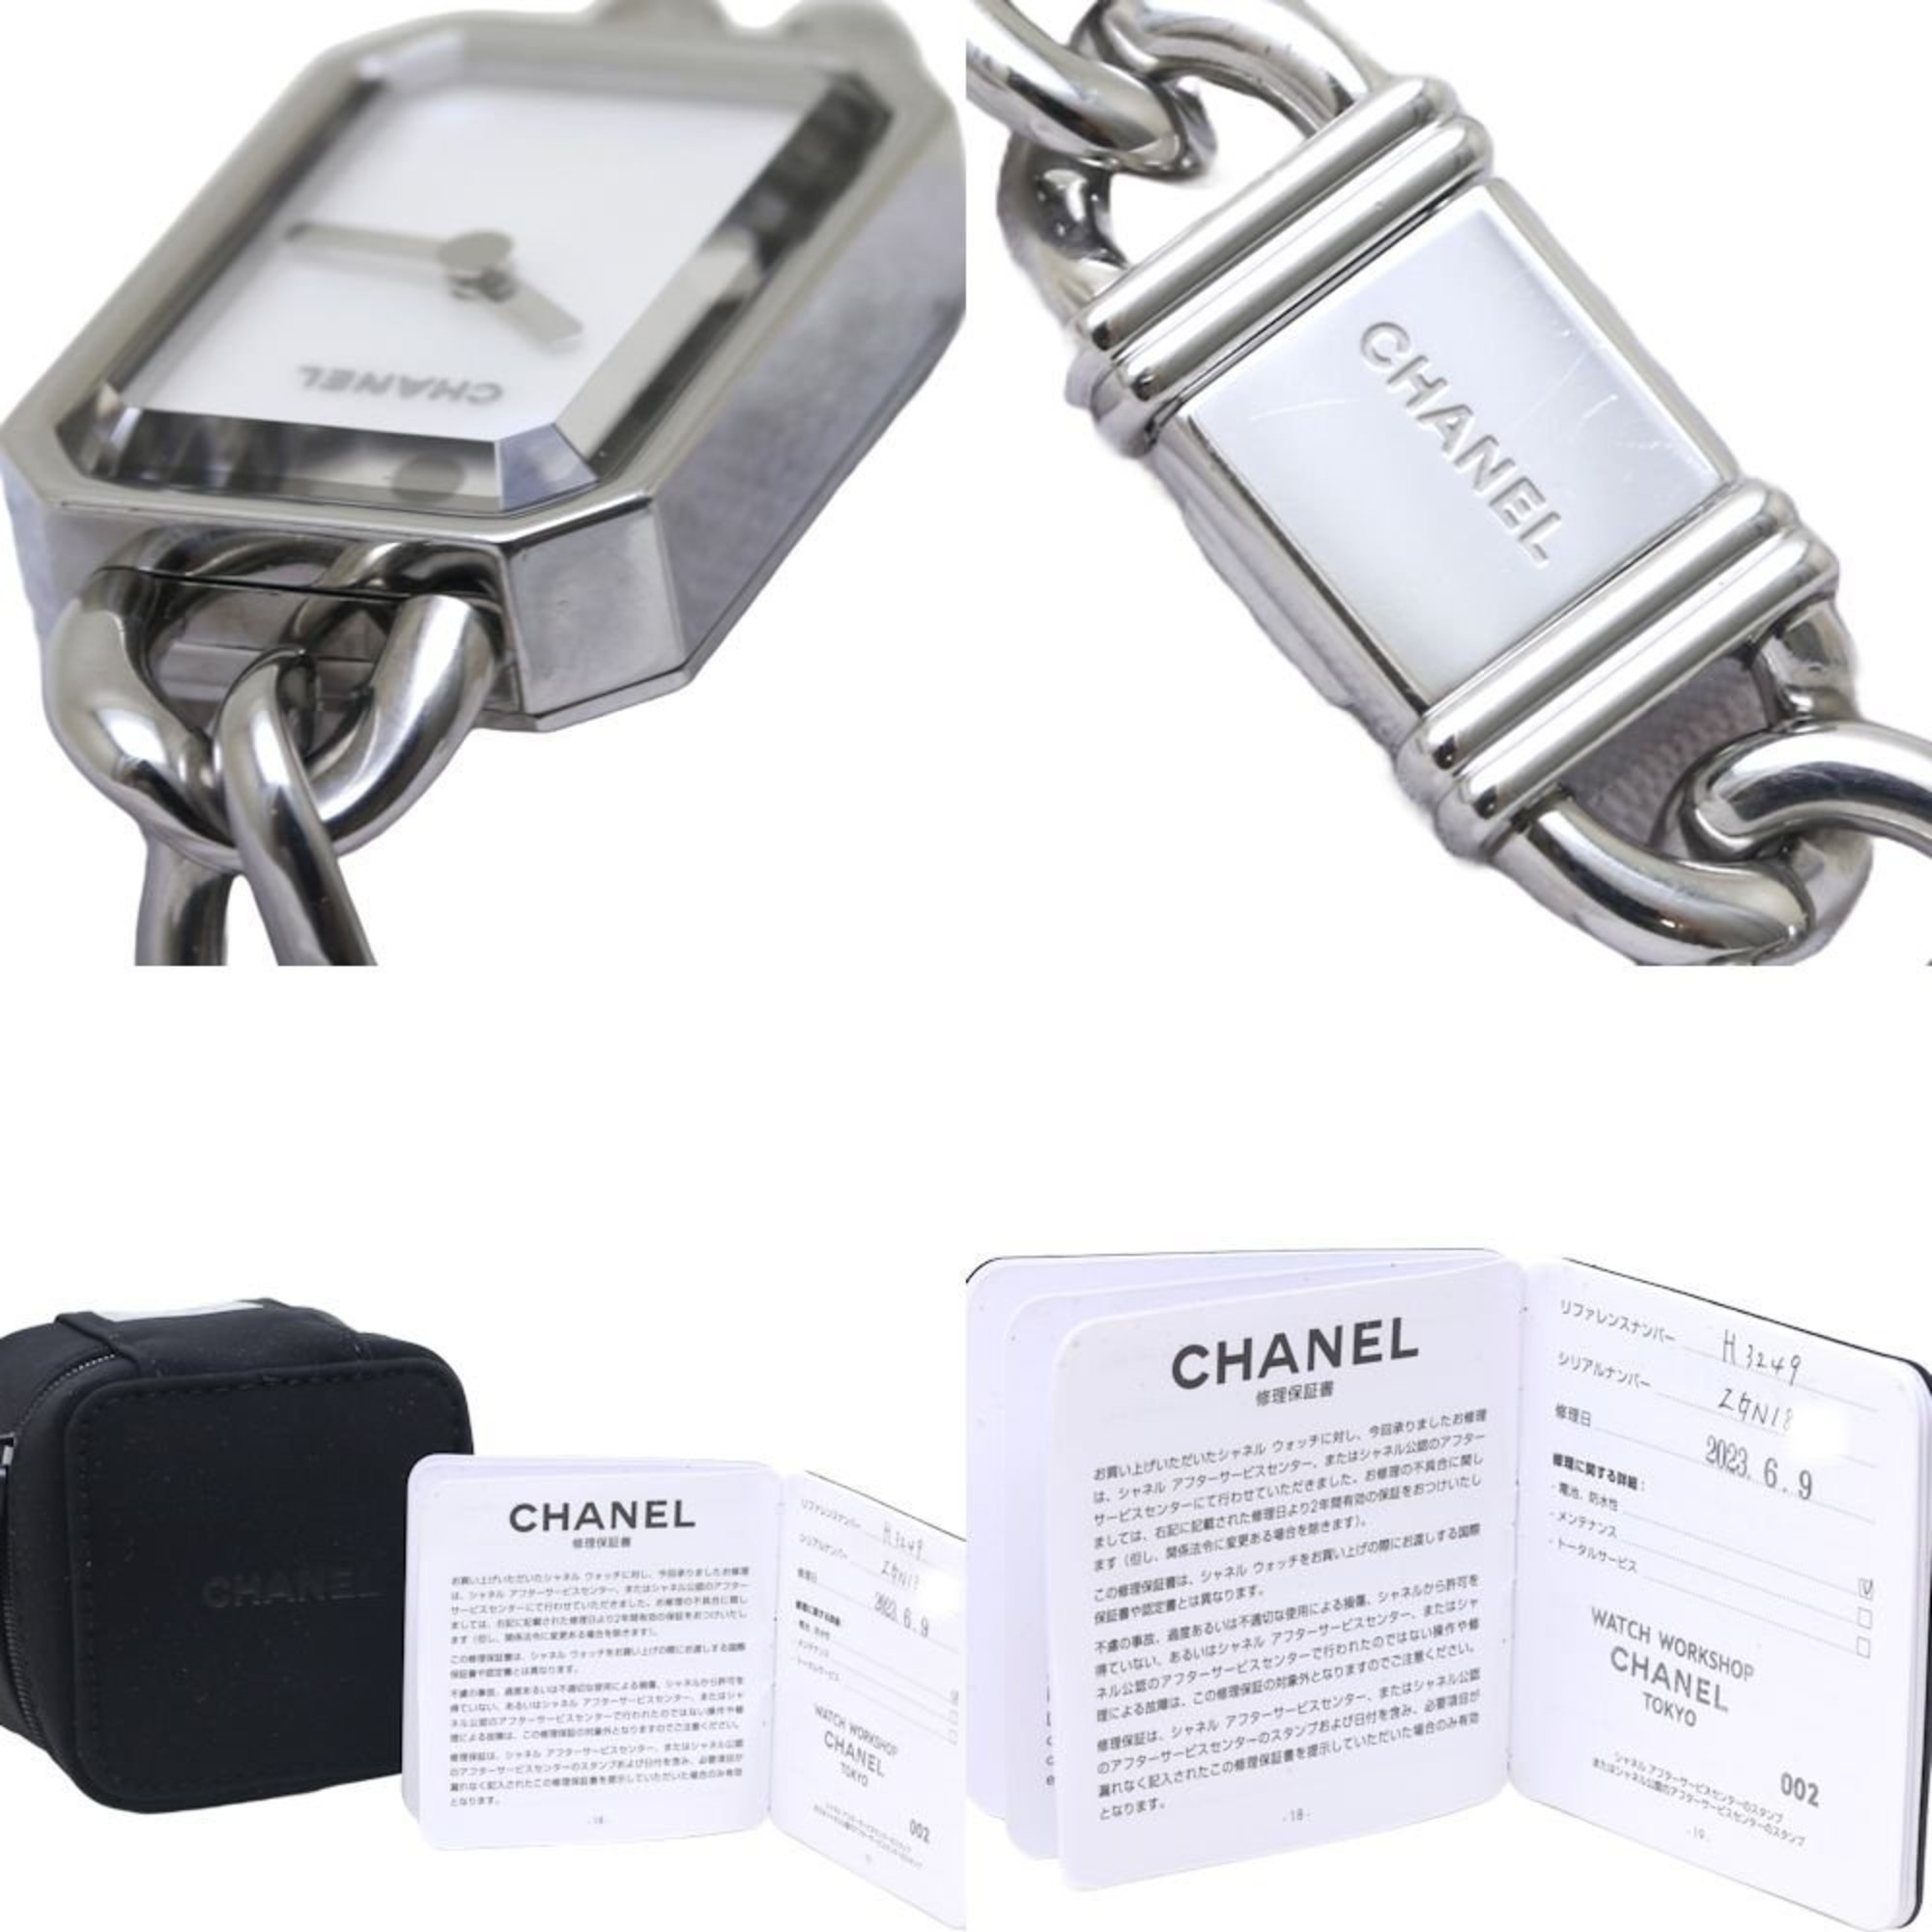 CHANEL Premiere H3249 Stainless Steel Ladies 130081 Watch